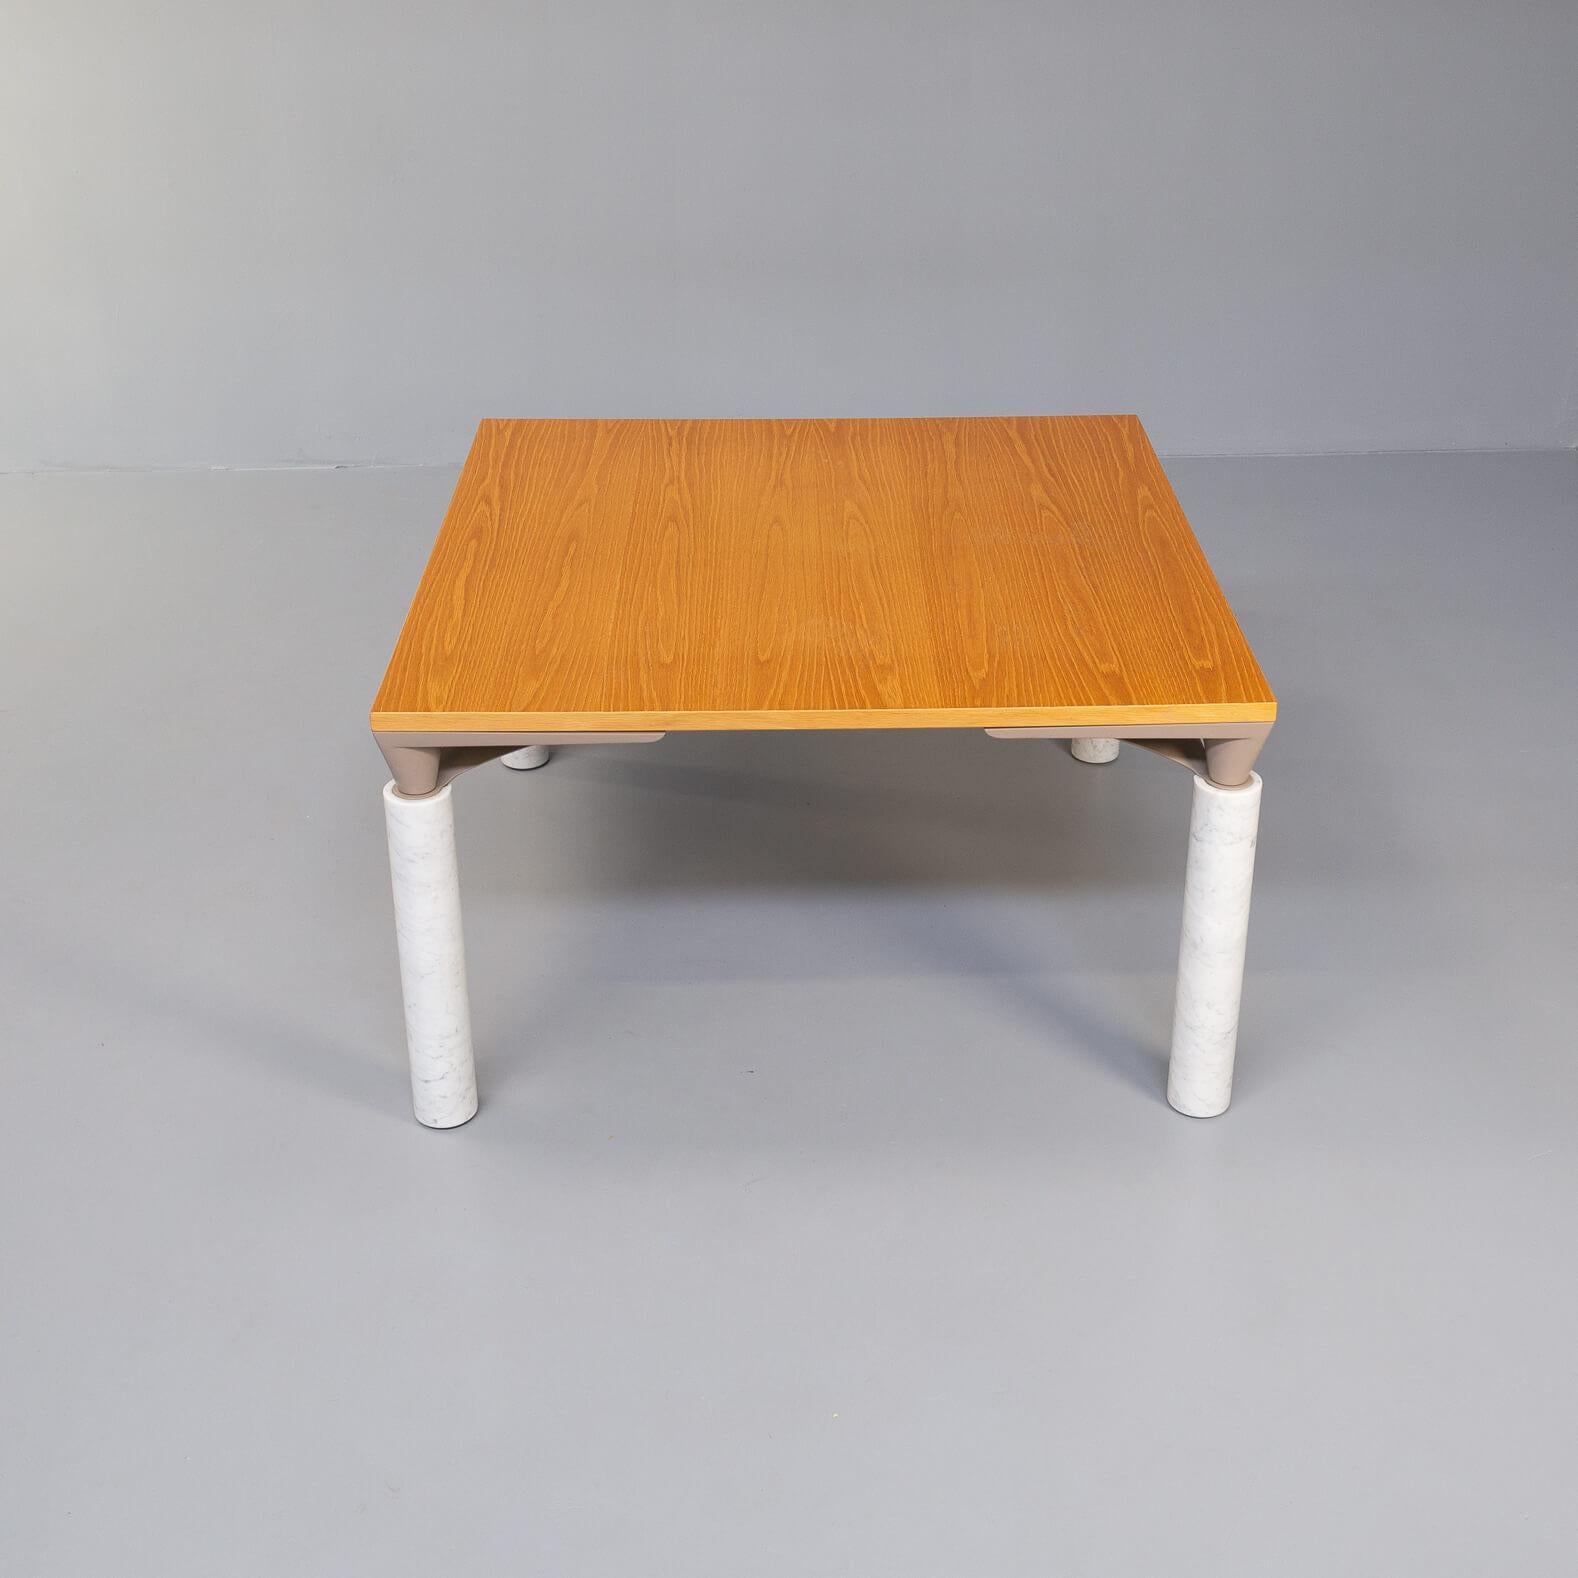 80s Francesco Binfare ‘lom850’ Dining Table by Cassina In Good Condition For Sale In Amstelveen, Noord